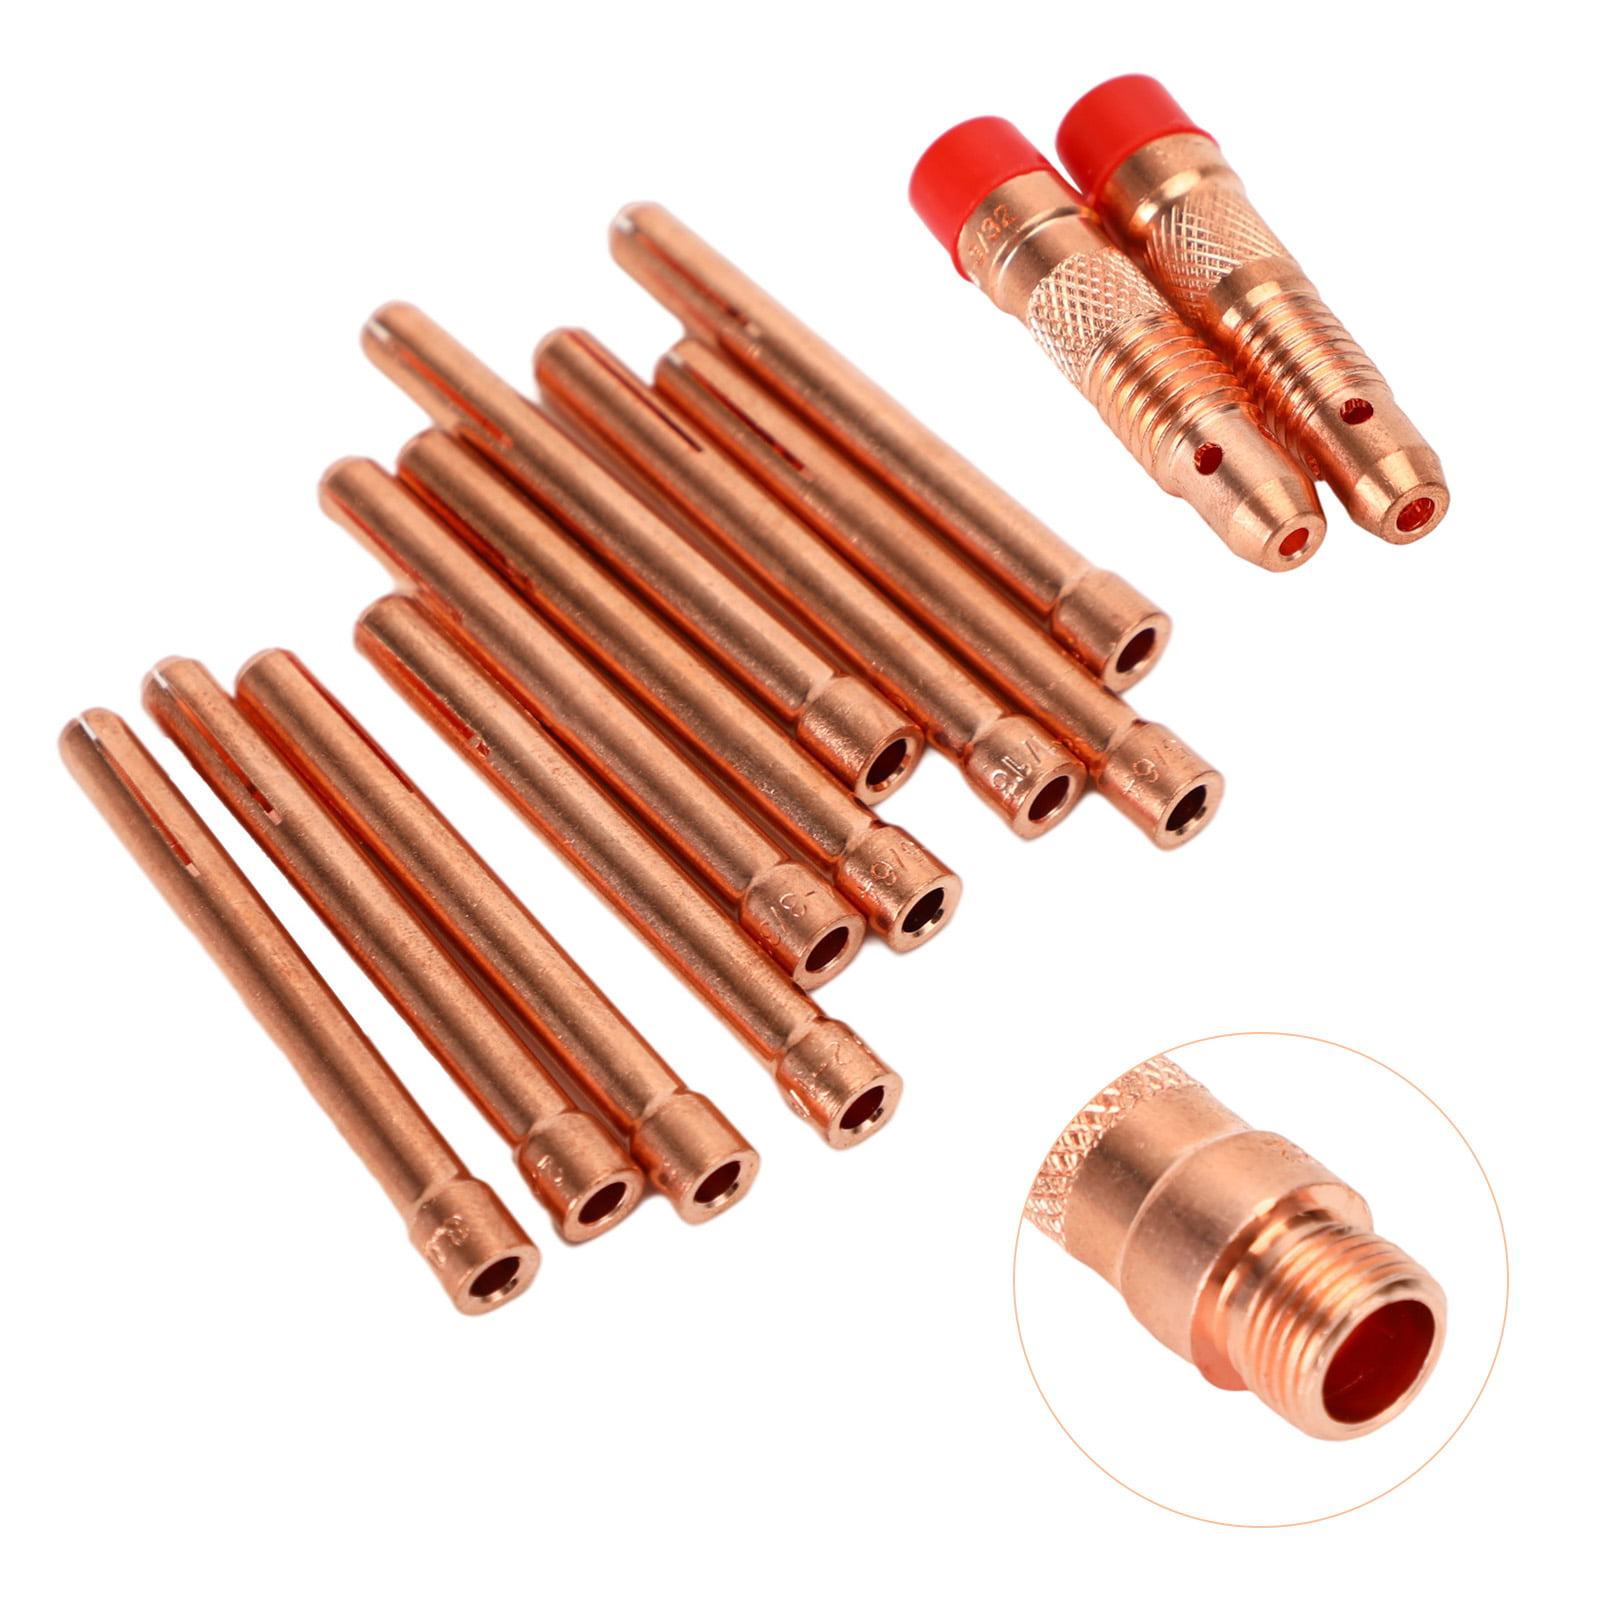 Welding Collet TIG For WP17 18 26 Torch 1.0-3.2mm Tip Replacement Spare Parts 